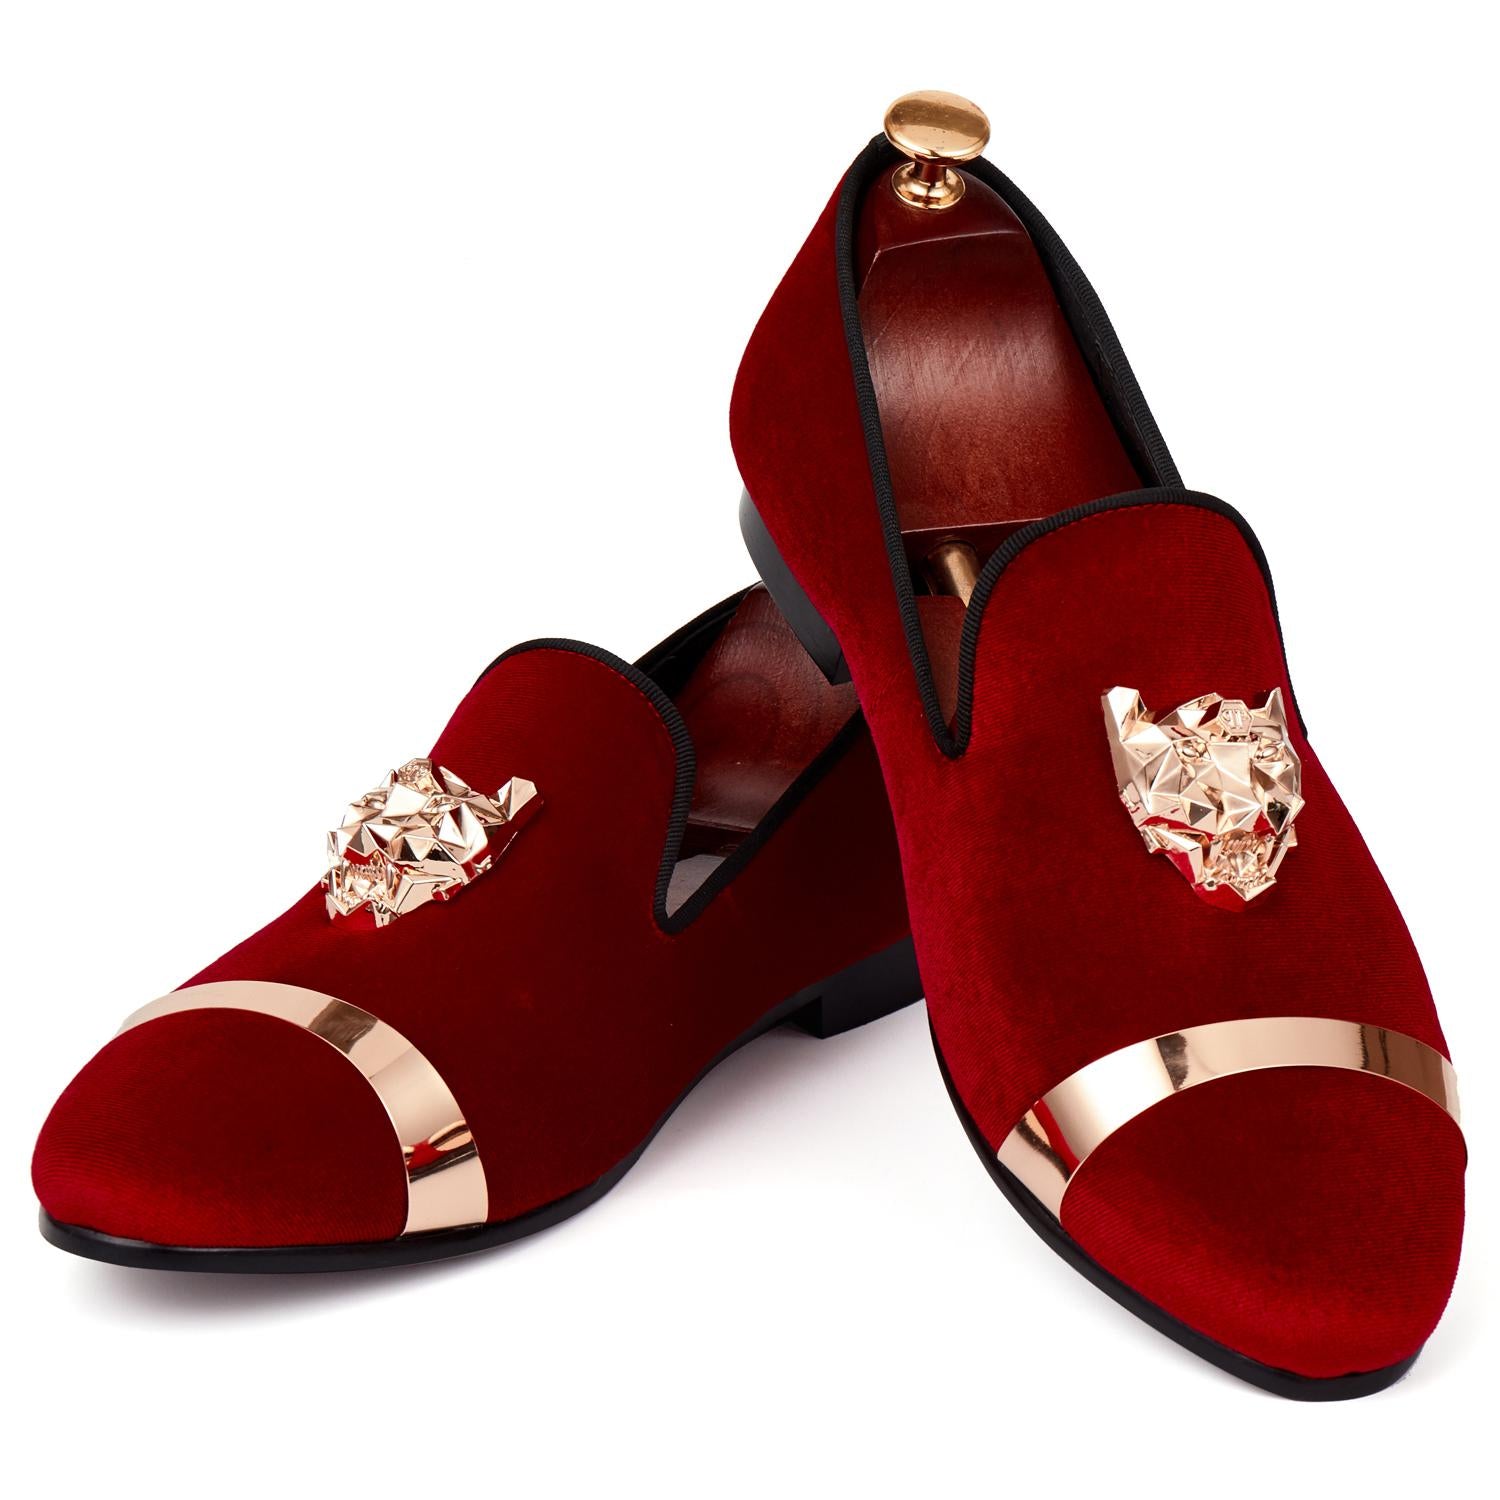 red versace dress shoes, OFF 78%,Buy!